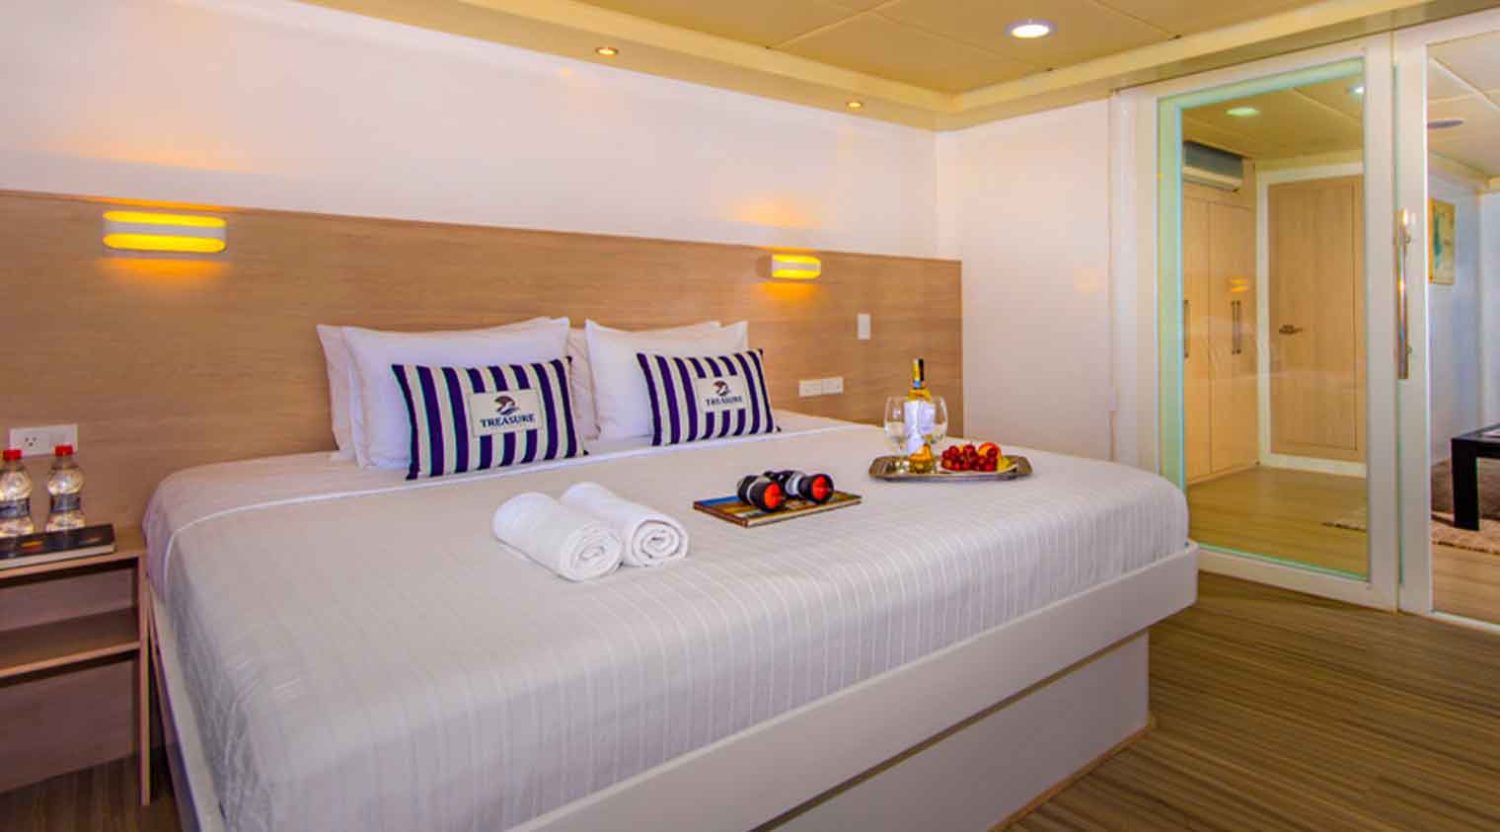 treasure of galapagos king size bed bed room of galapagos islands tours